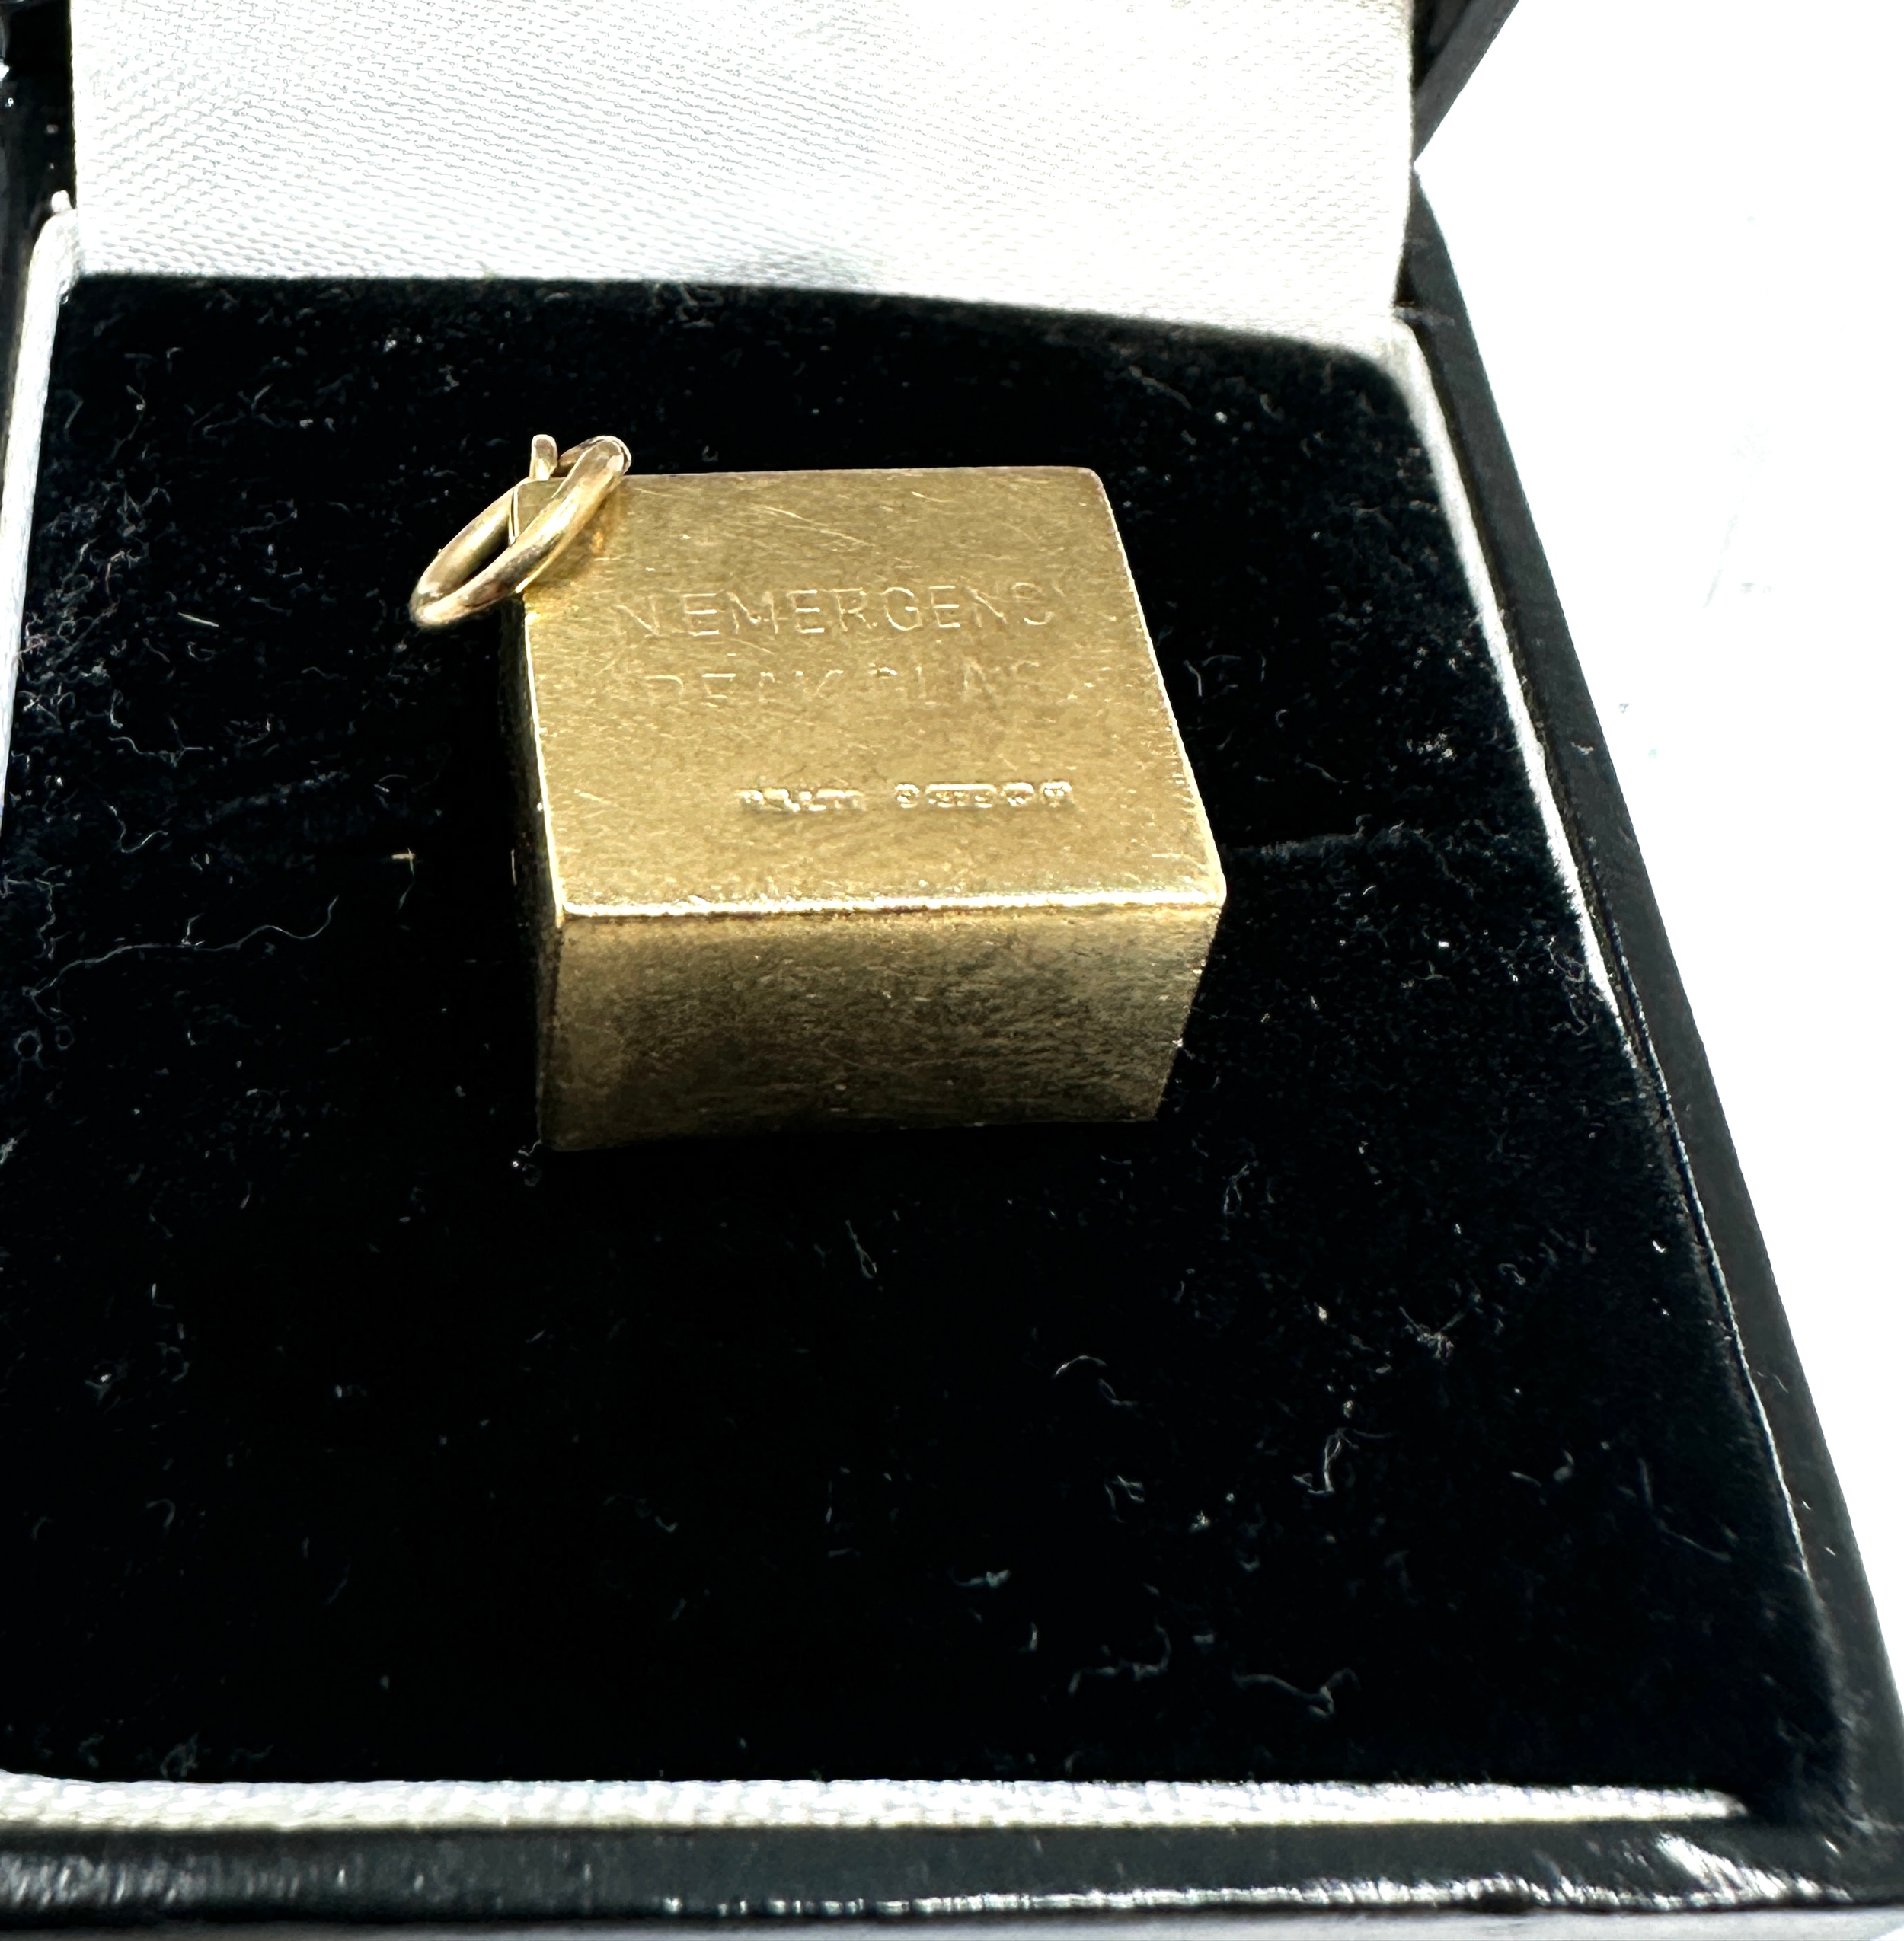 vintage 9ct gold emergency money charm weight 2.9g - Image 3 of 3